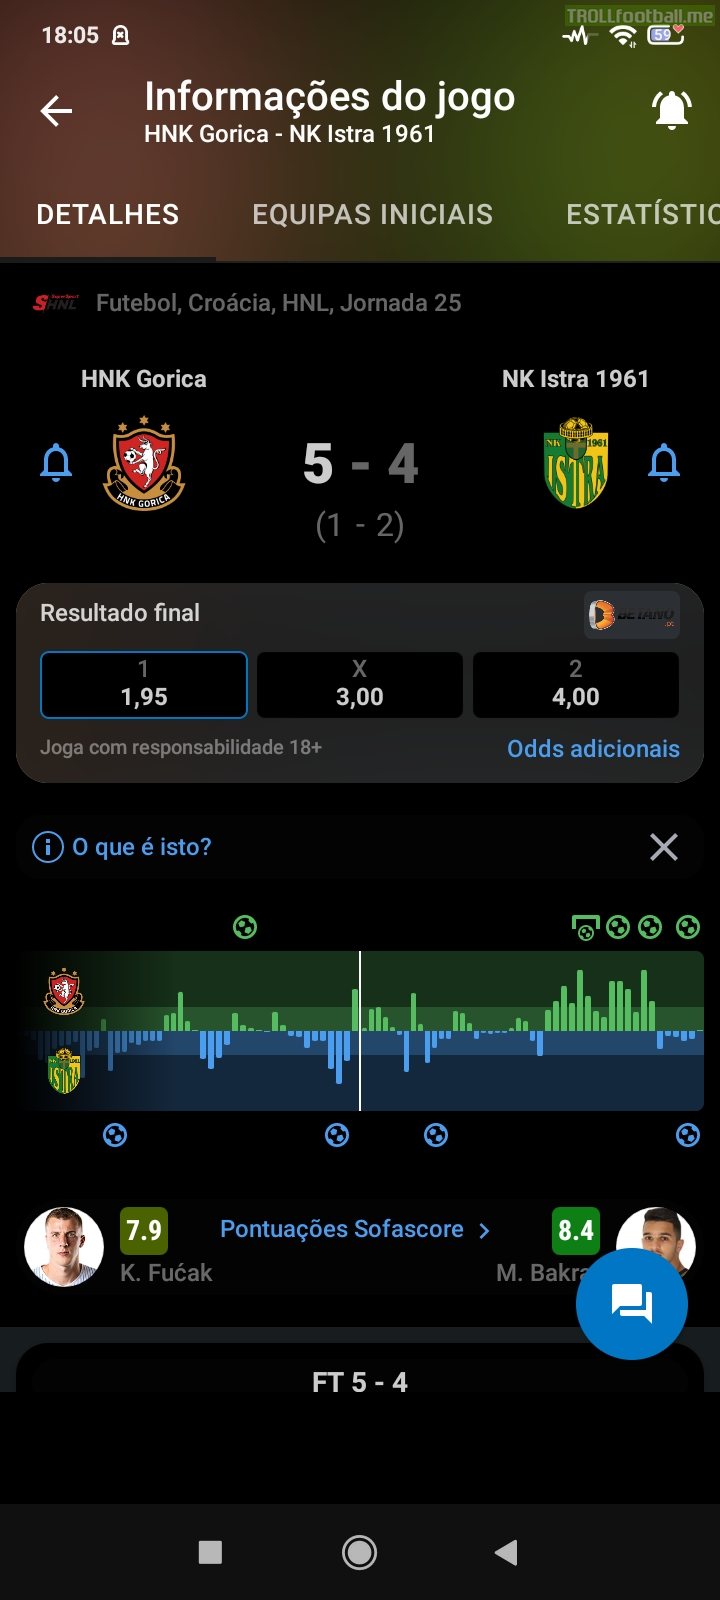 [1.HNL] HNK Gorica beats NK Istra 5-4 in a crazy final 20 minutes that saw the home team come from 1-3 down to 4-3 up in 4 minutes, then the away side drawing at the death, only for Gorica go up the other end and score the winner